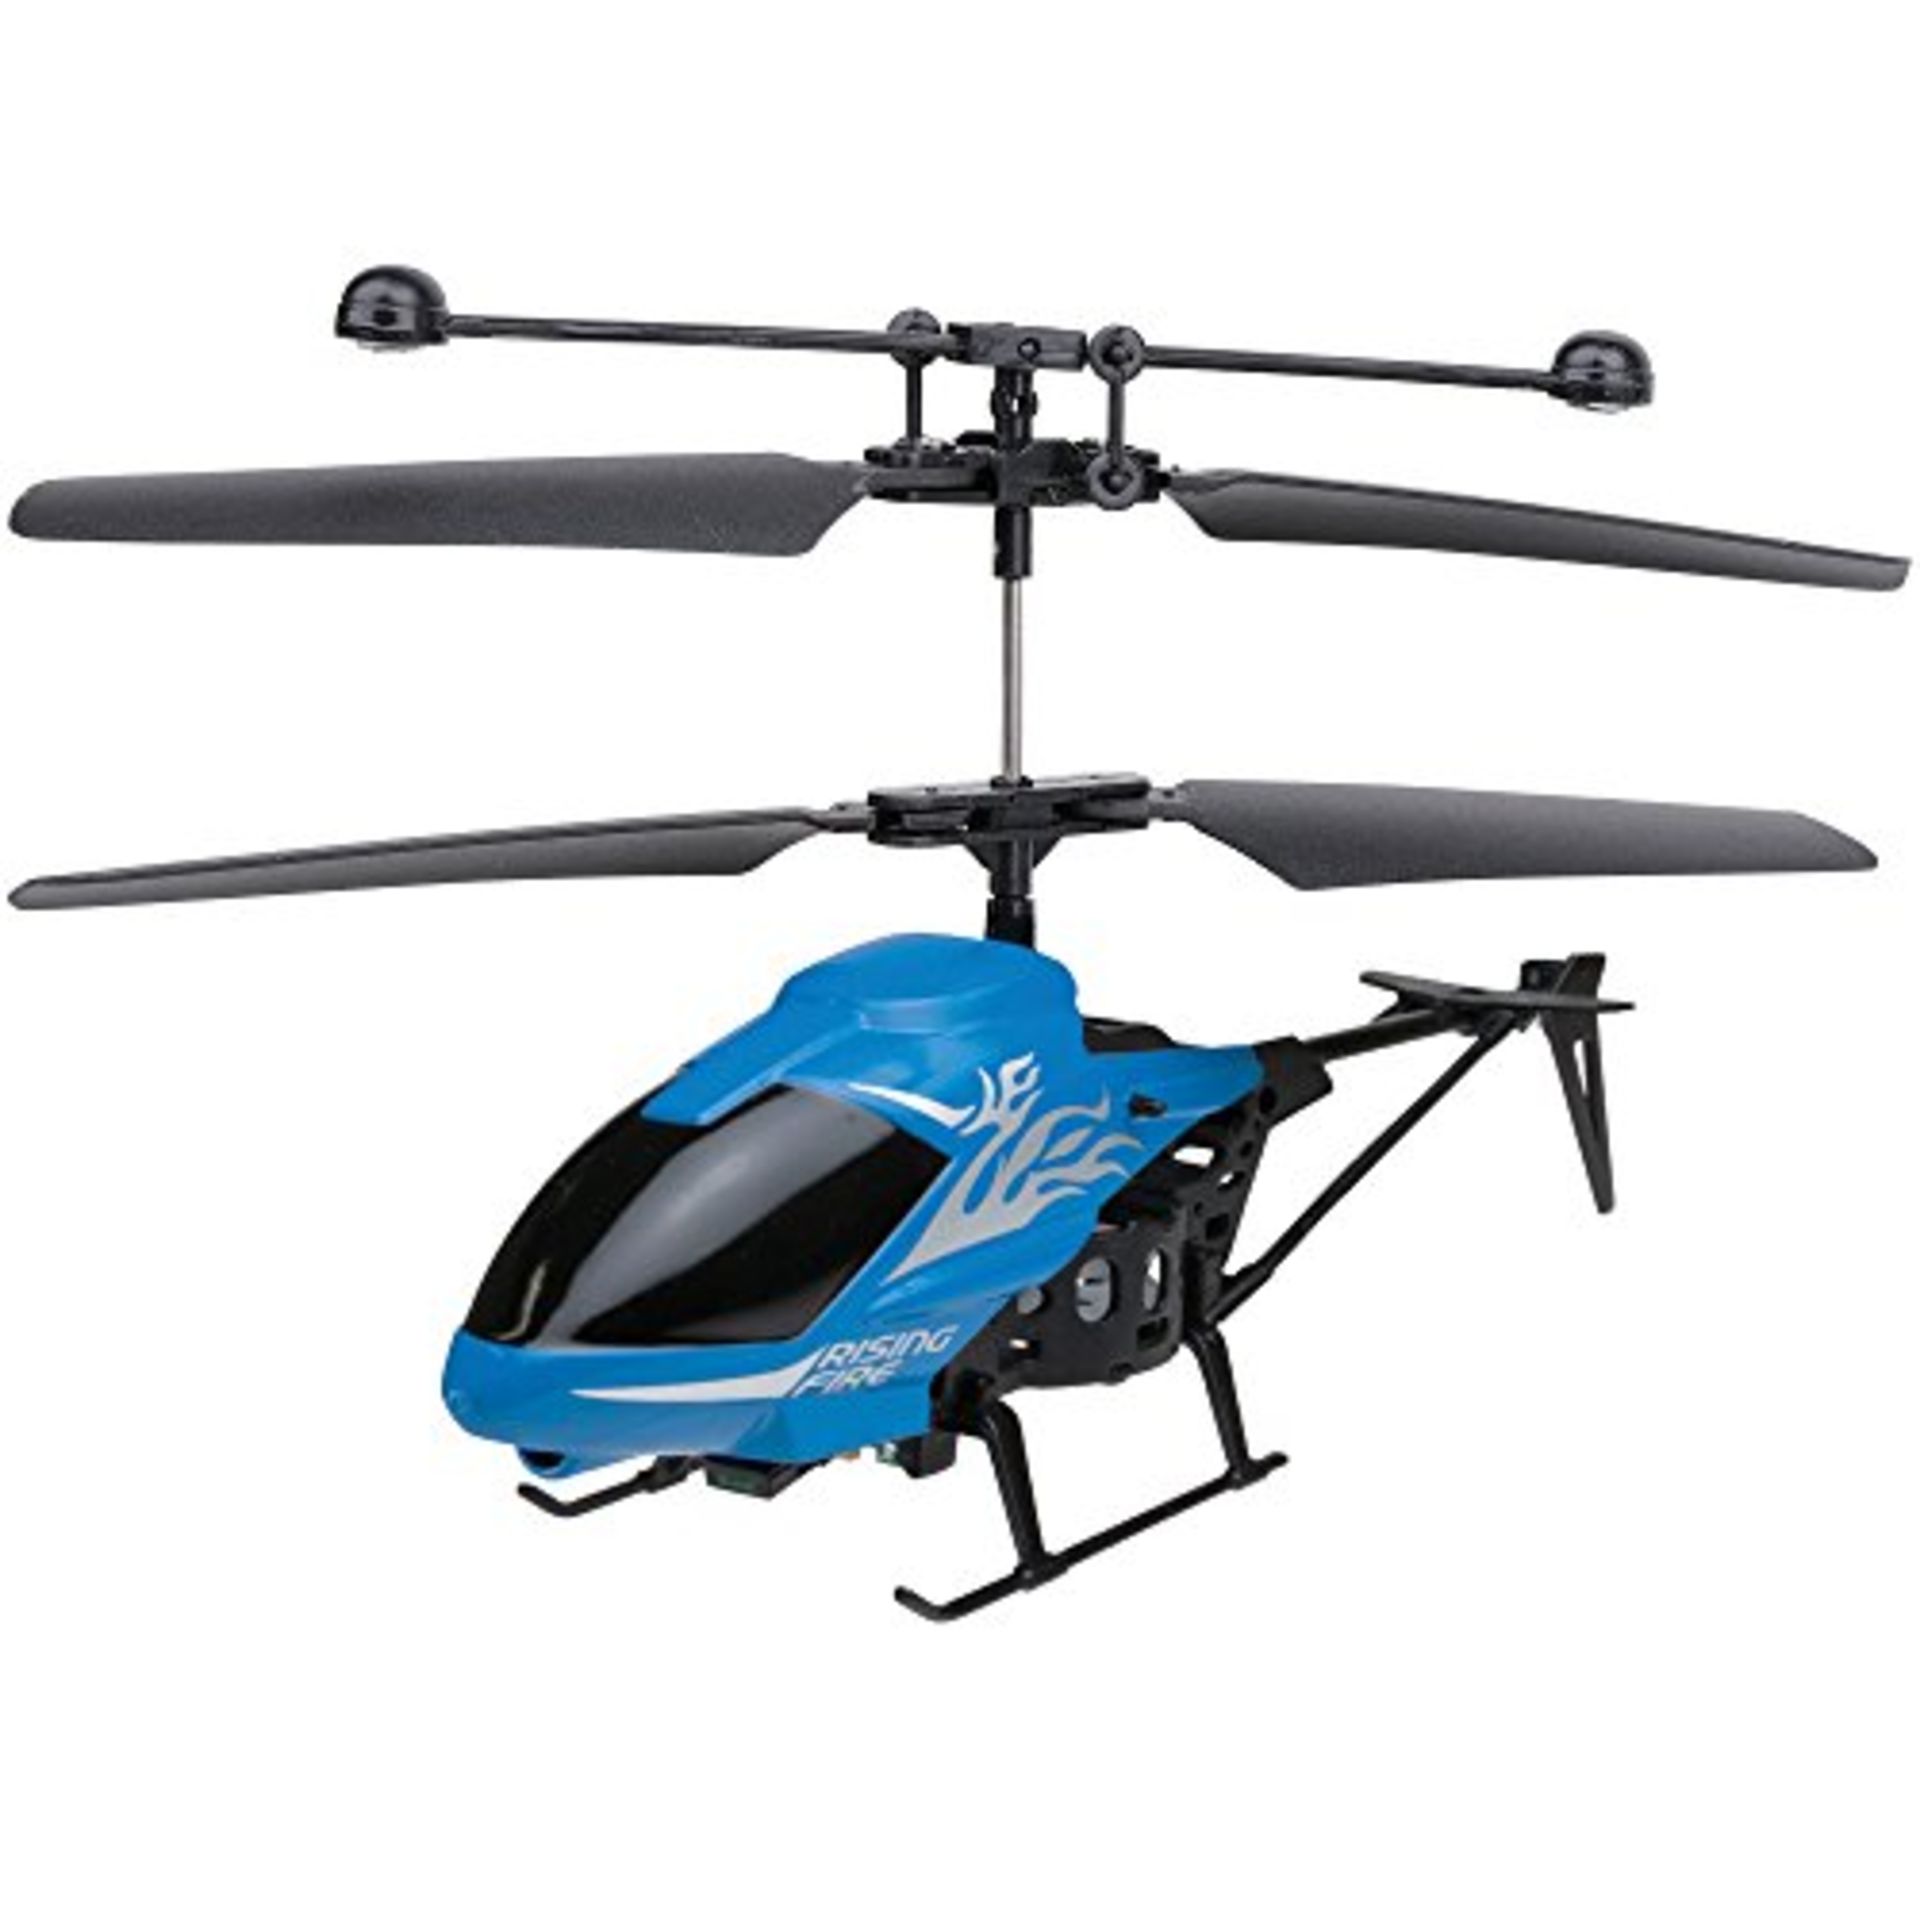 + VAT Brand New Interceptor X-20 Radio Controlled Helicopter Brand New Sealed Complete With